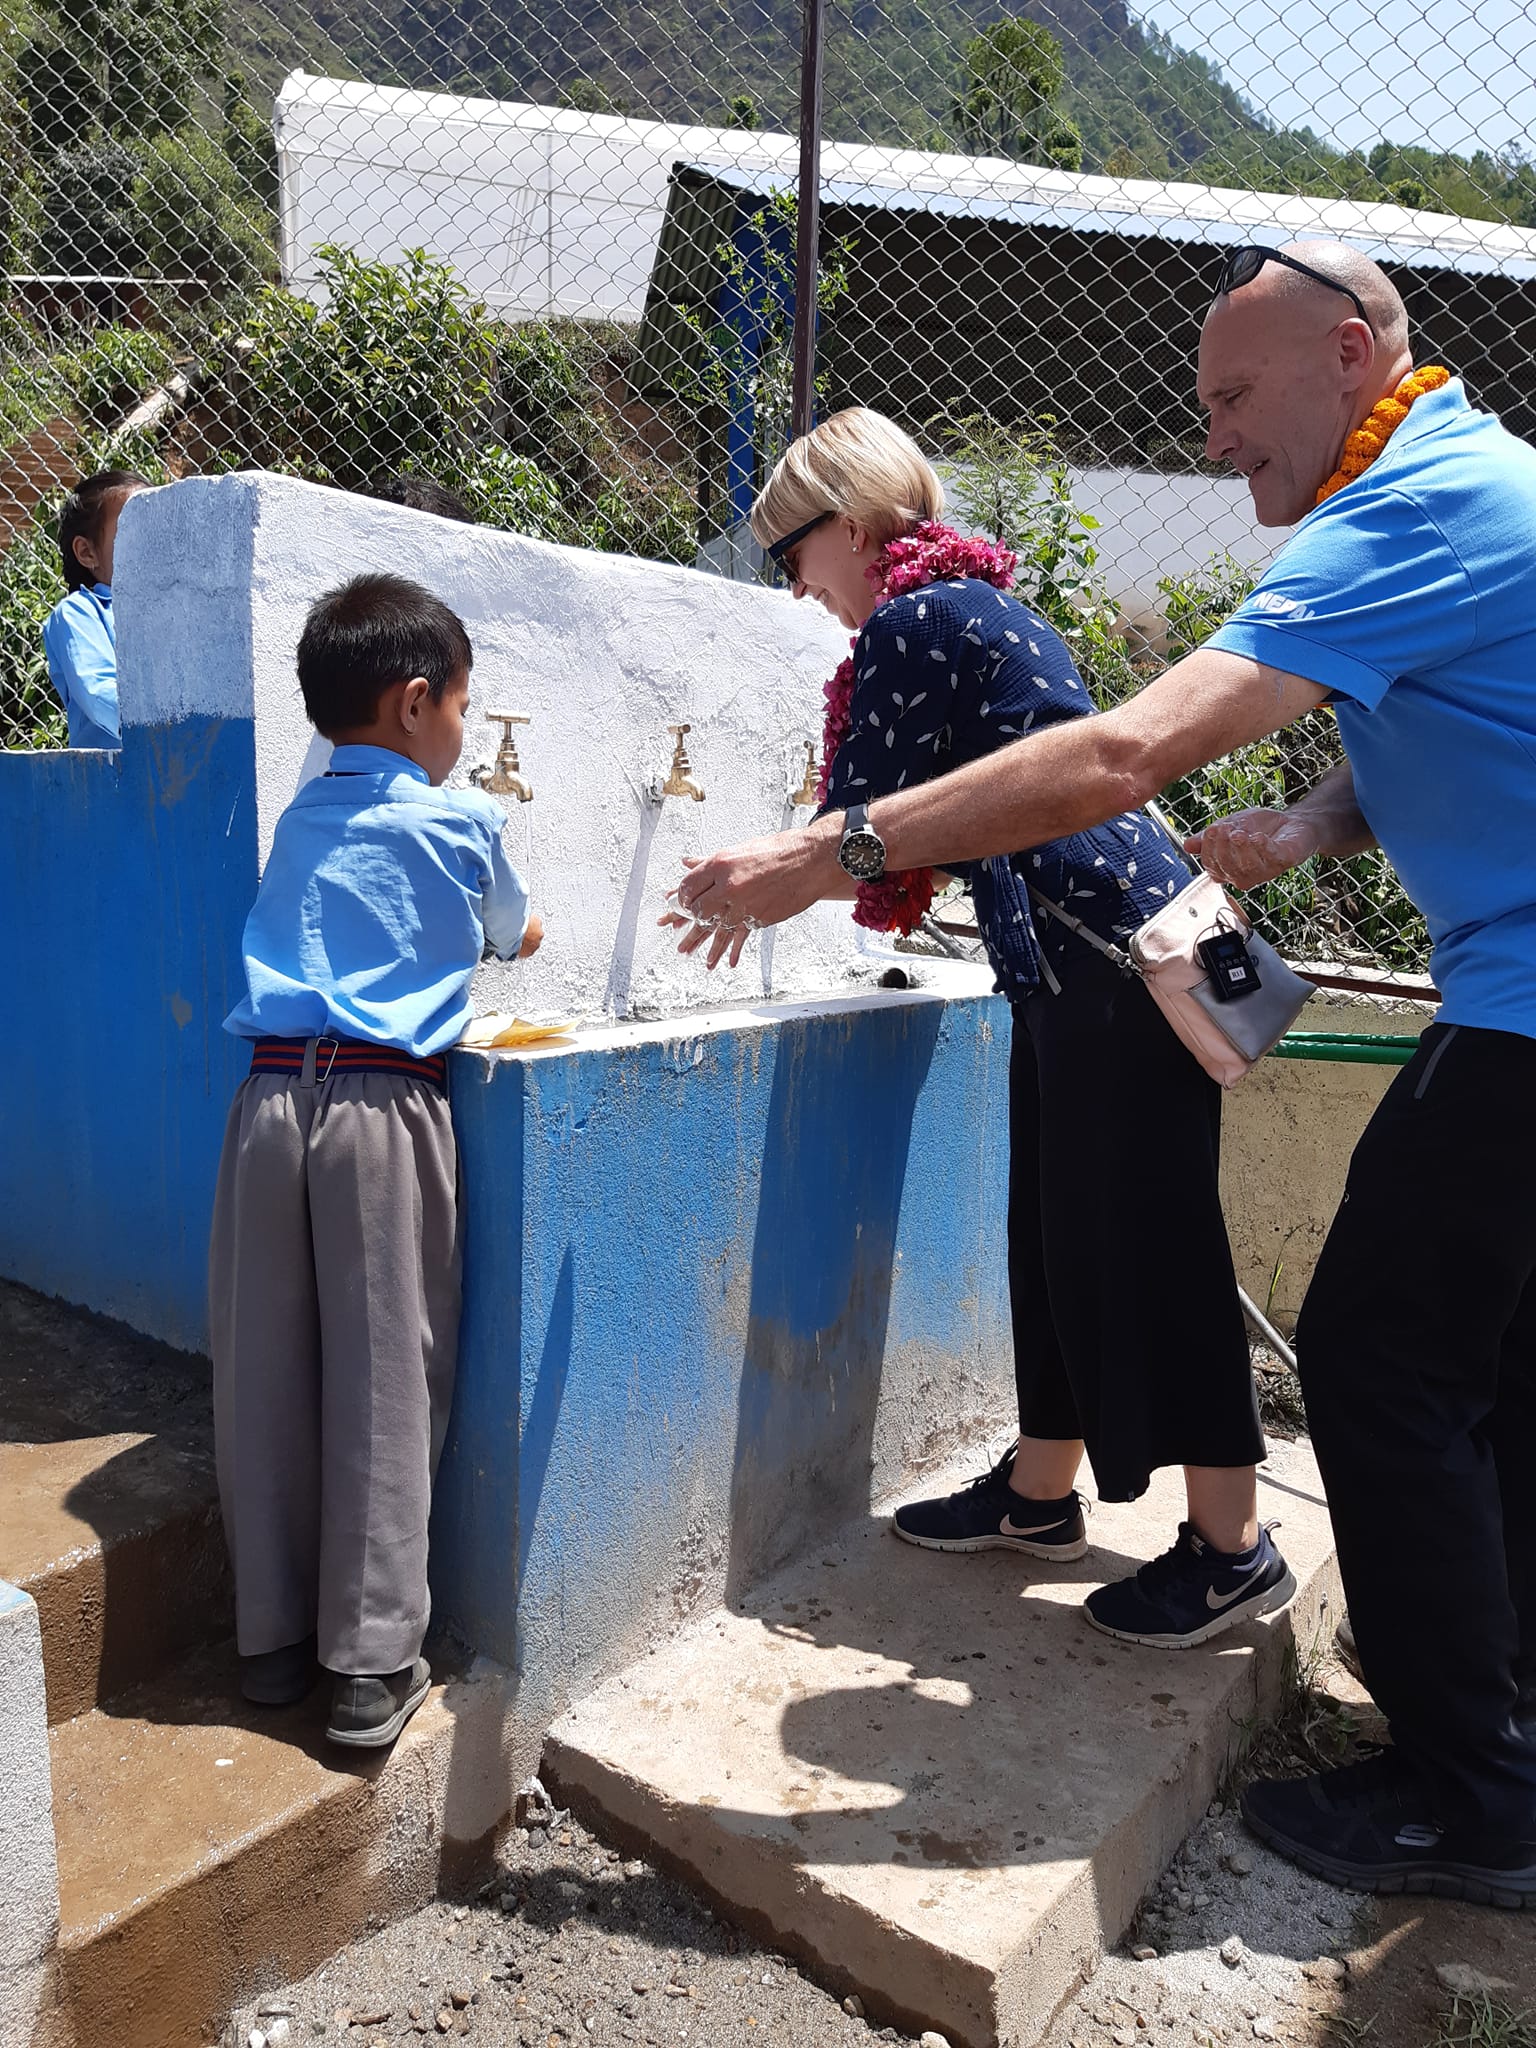 The Embassy team on a school visit with WFP related to a school-feeding program, washing hands together with the young students before the school meal.